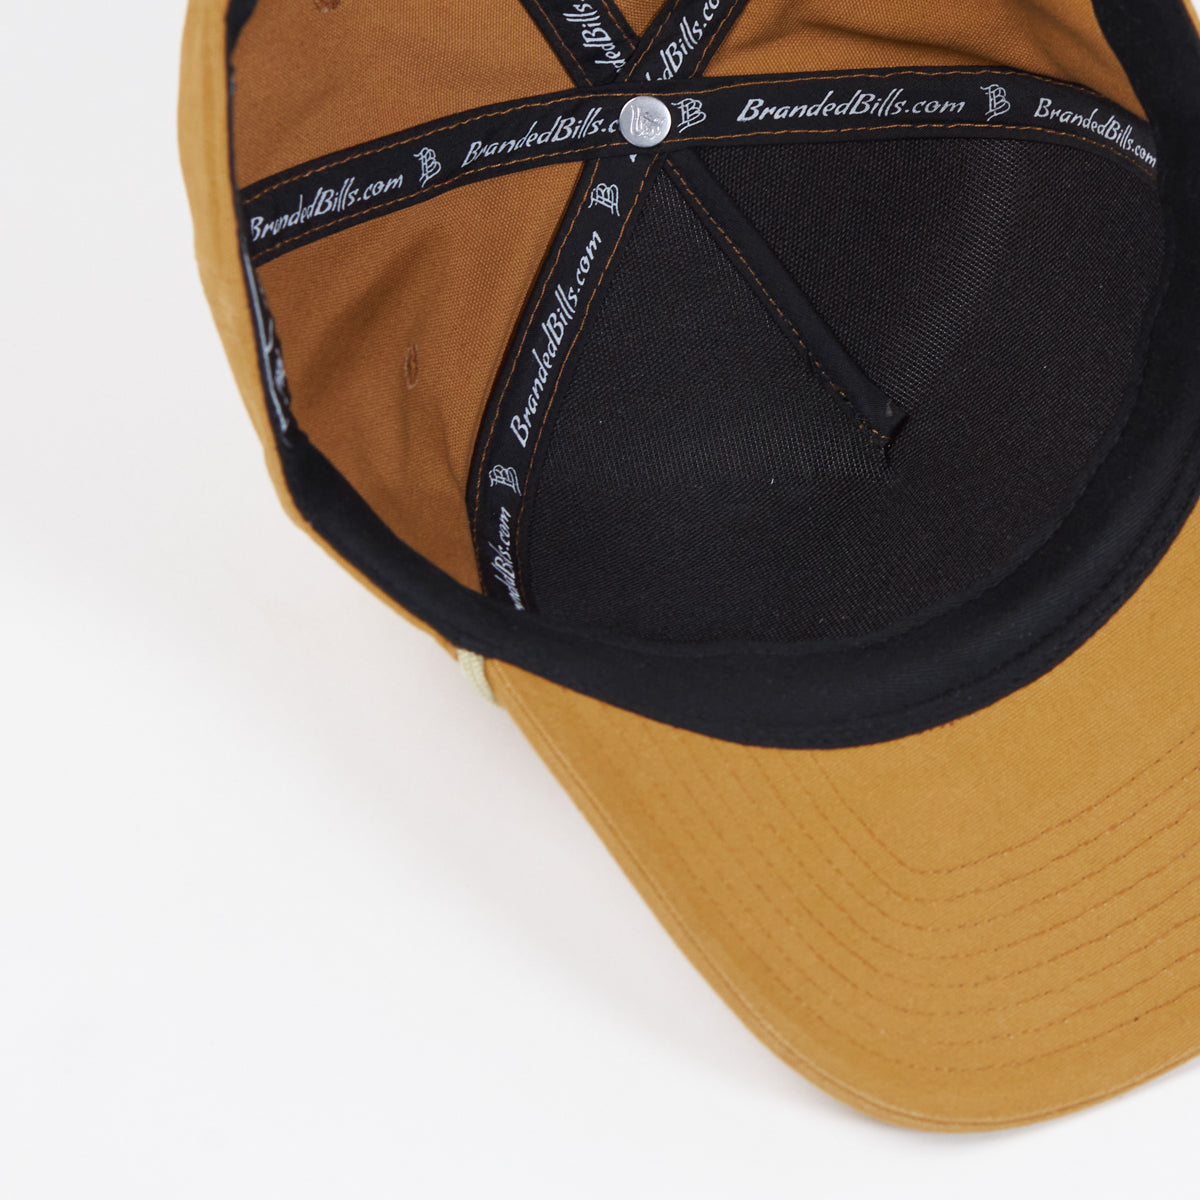 Old Glory Stealth Canvas 5 Panel Rope Wheat